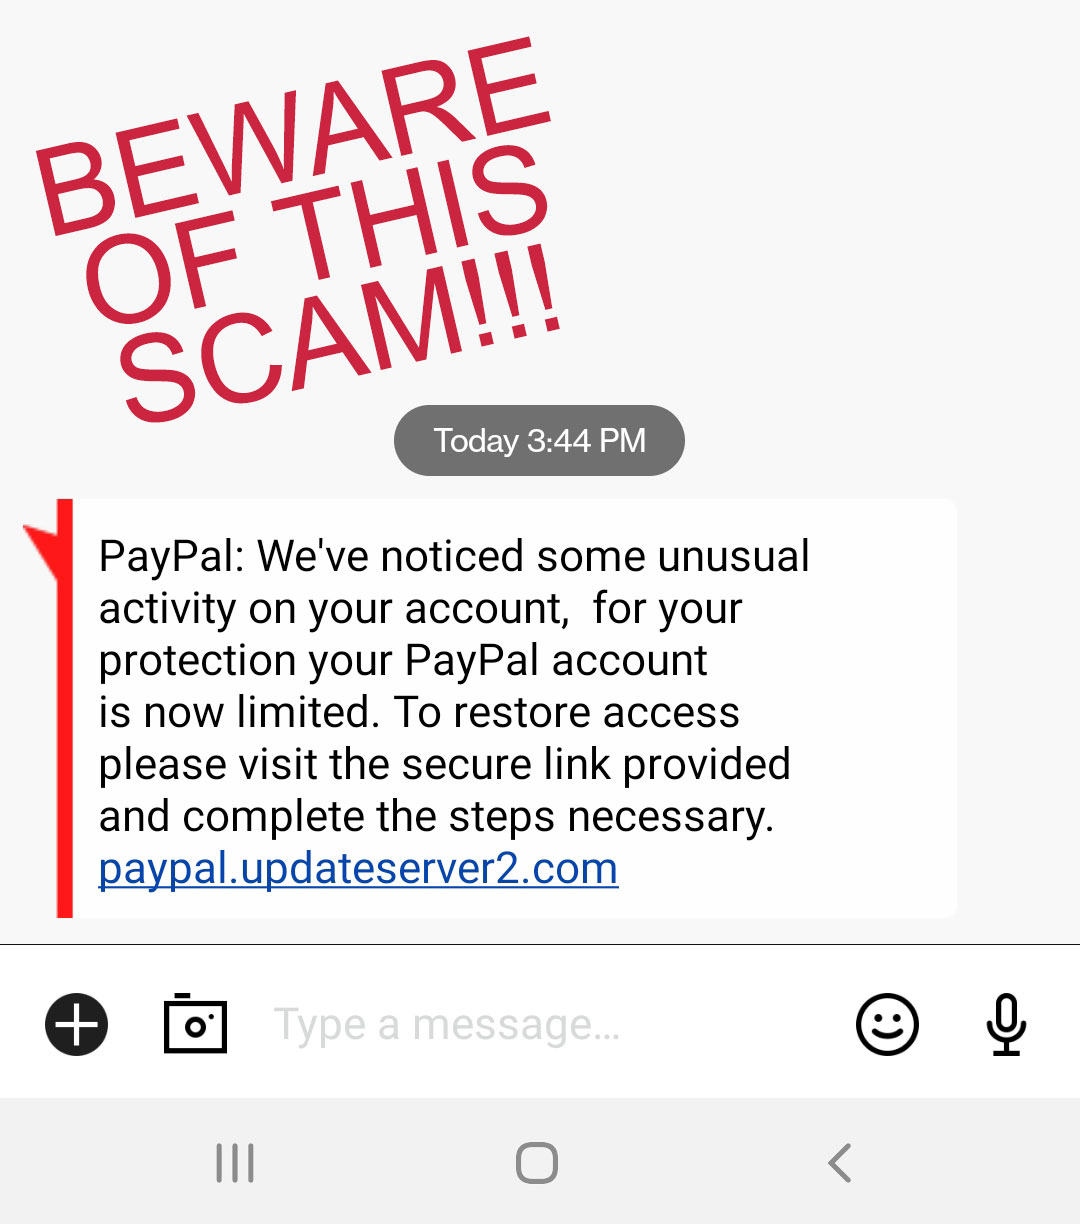 beware-paypal-scam-1-26-21